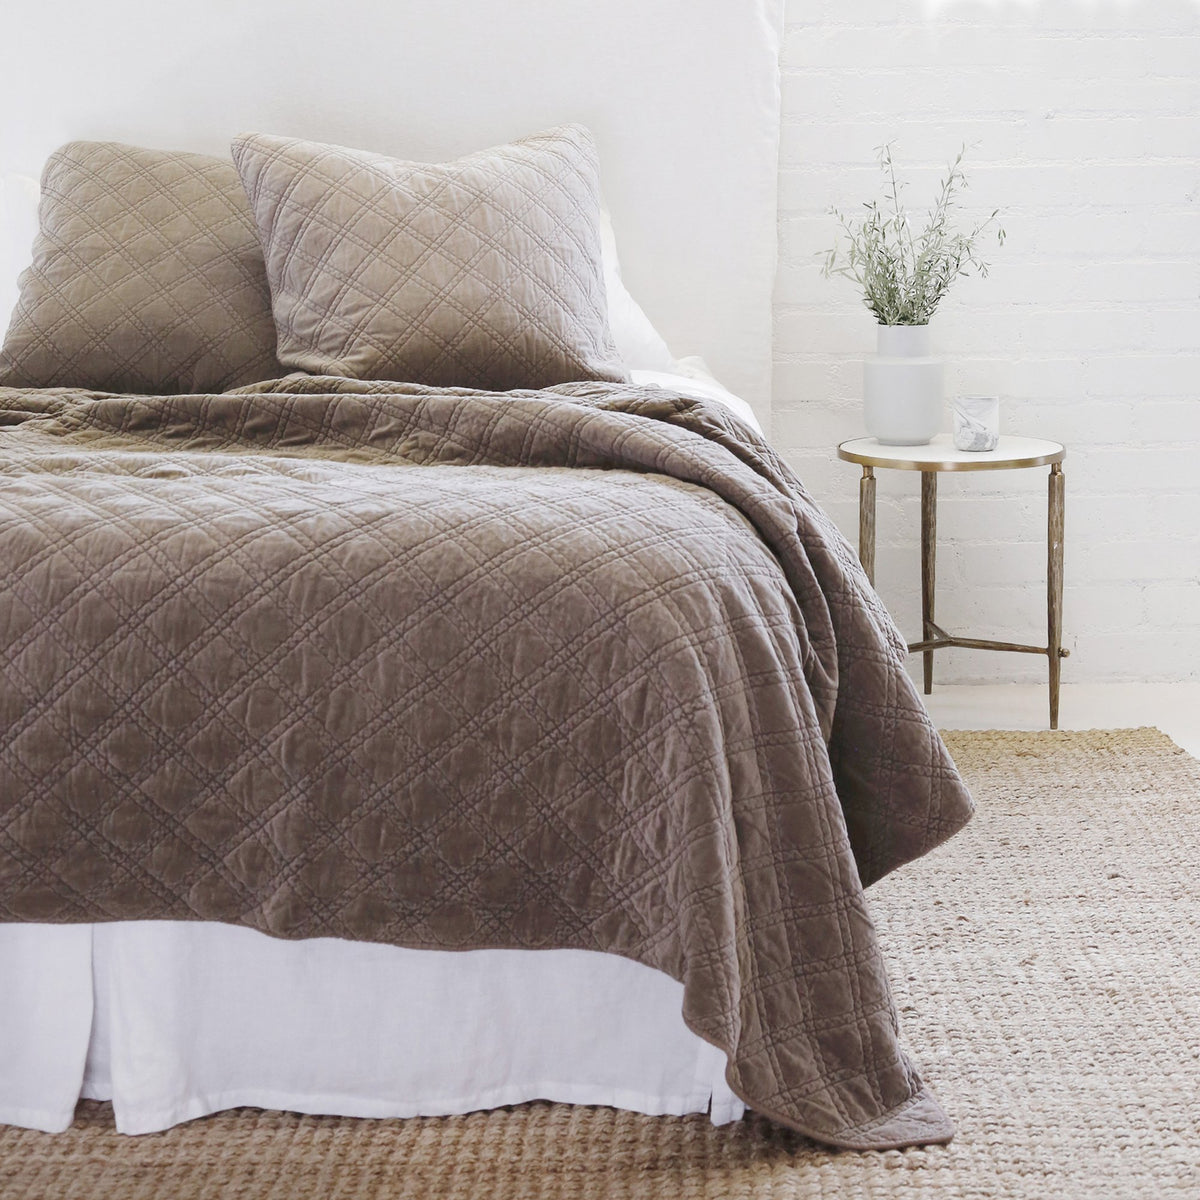 POM POM BRUSSELS COVERLET COLLECTION - WALNUT